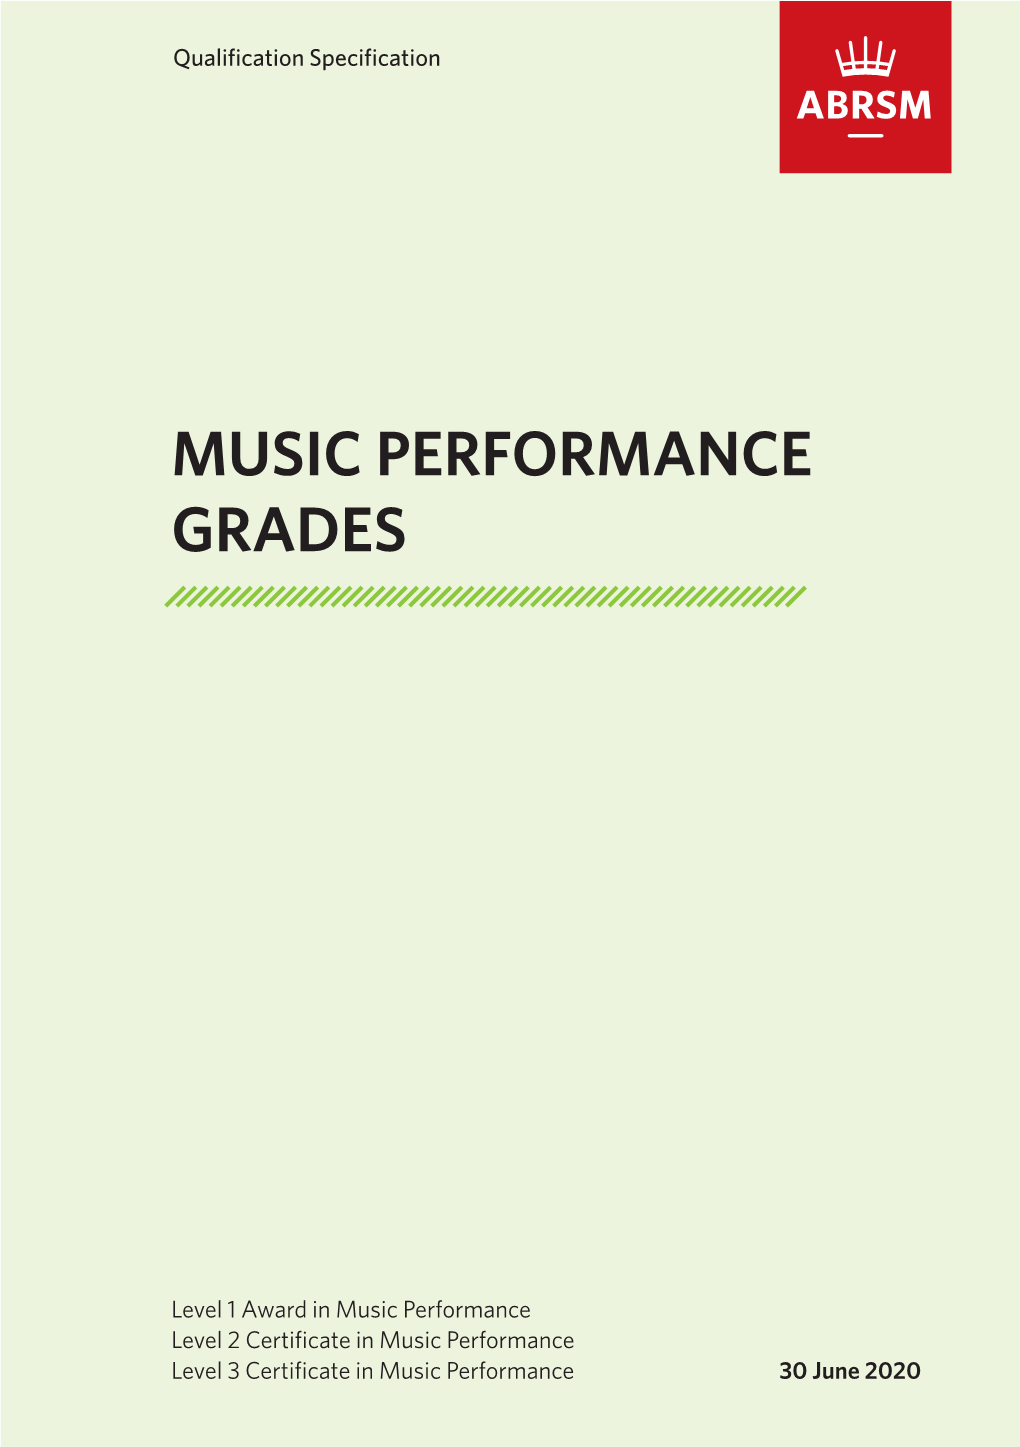 Qualification Specification: Music Performance Grades